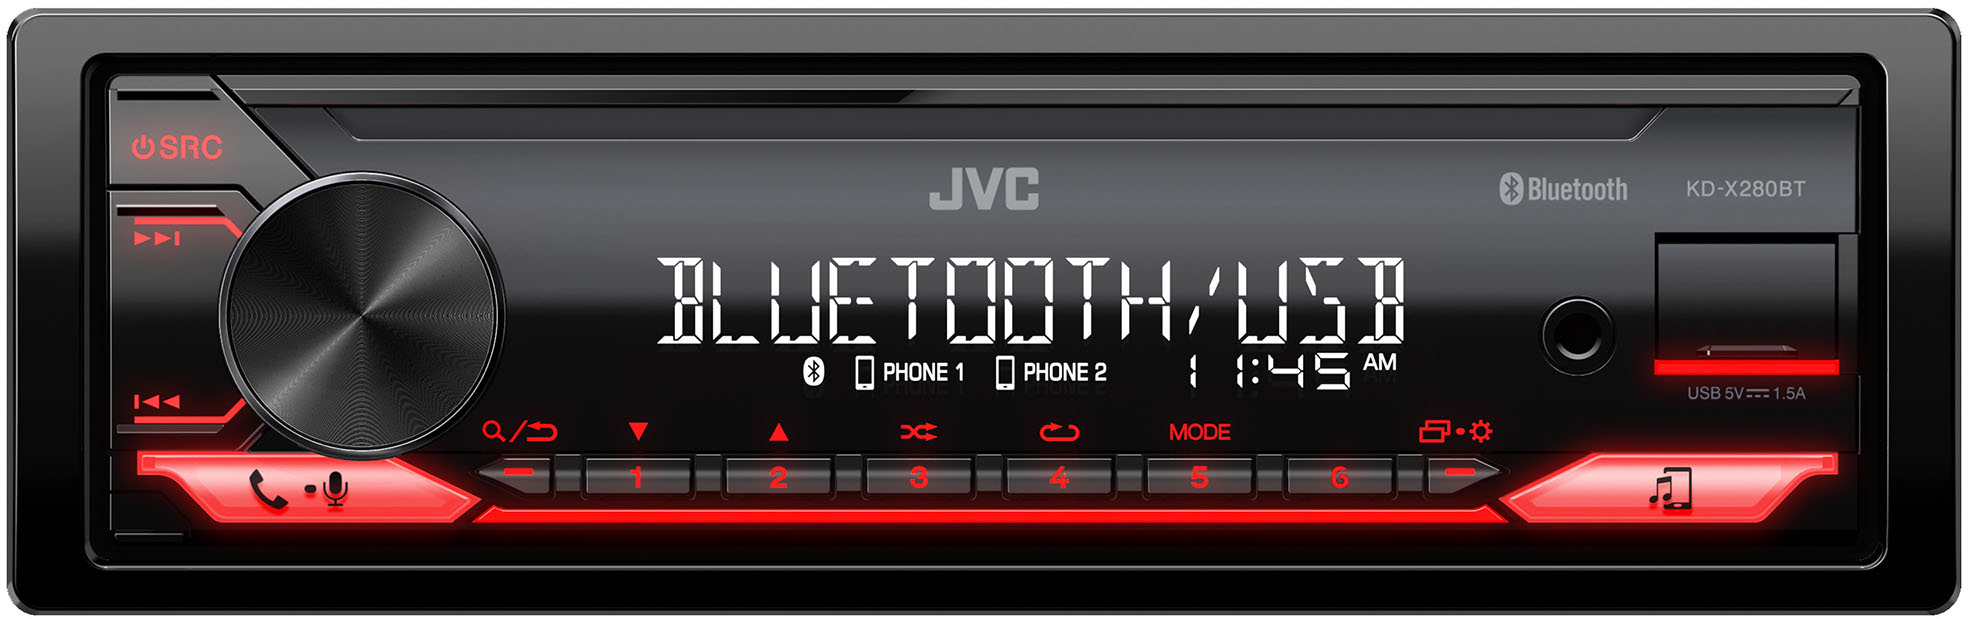 JVC Bluetooth Digital Media (DM) Receiver with Detachable Faceplate and USB  Rapid Charge Black KD-X280BT - Best Buy